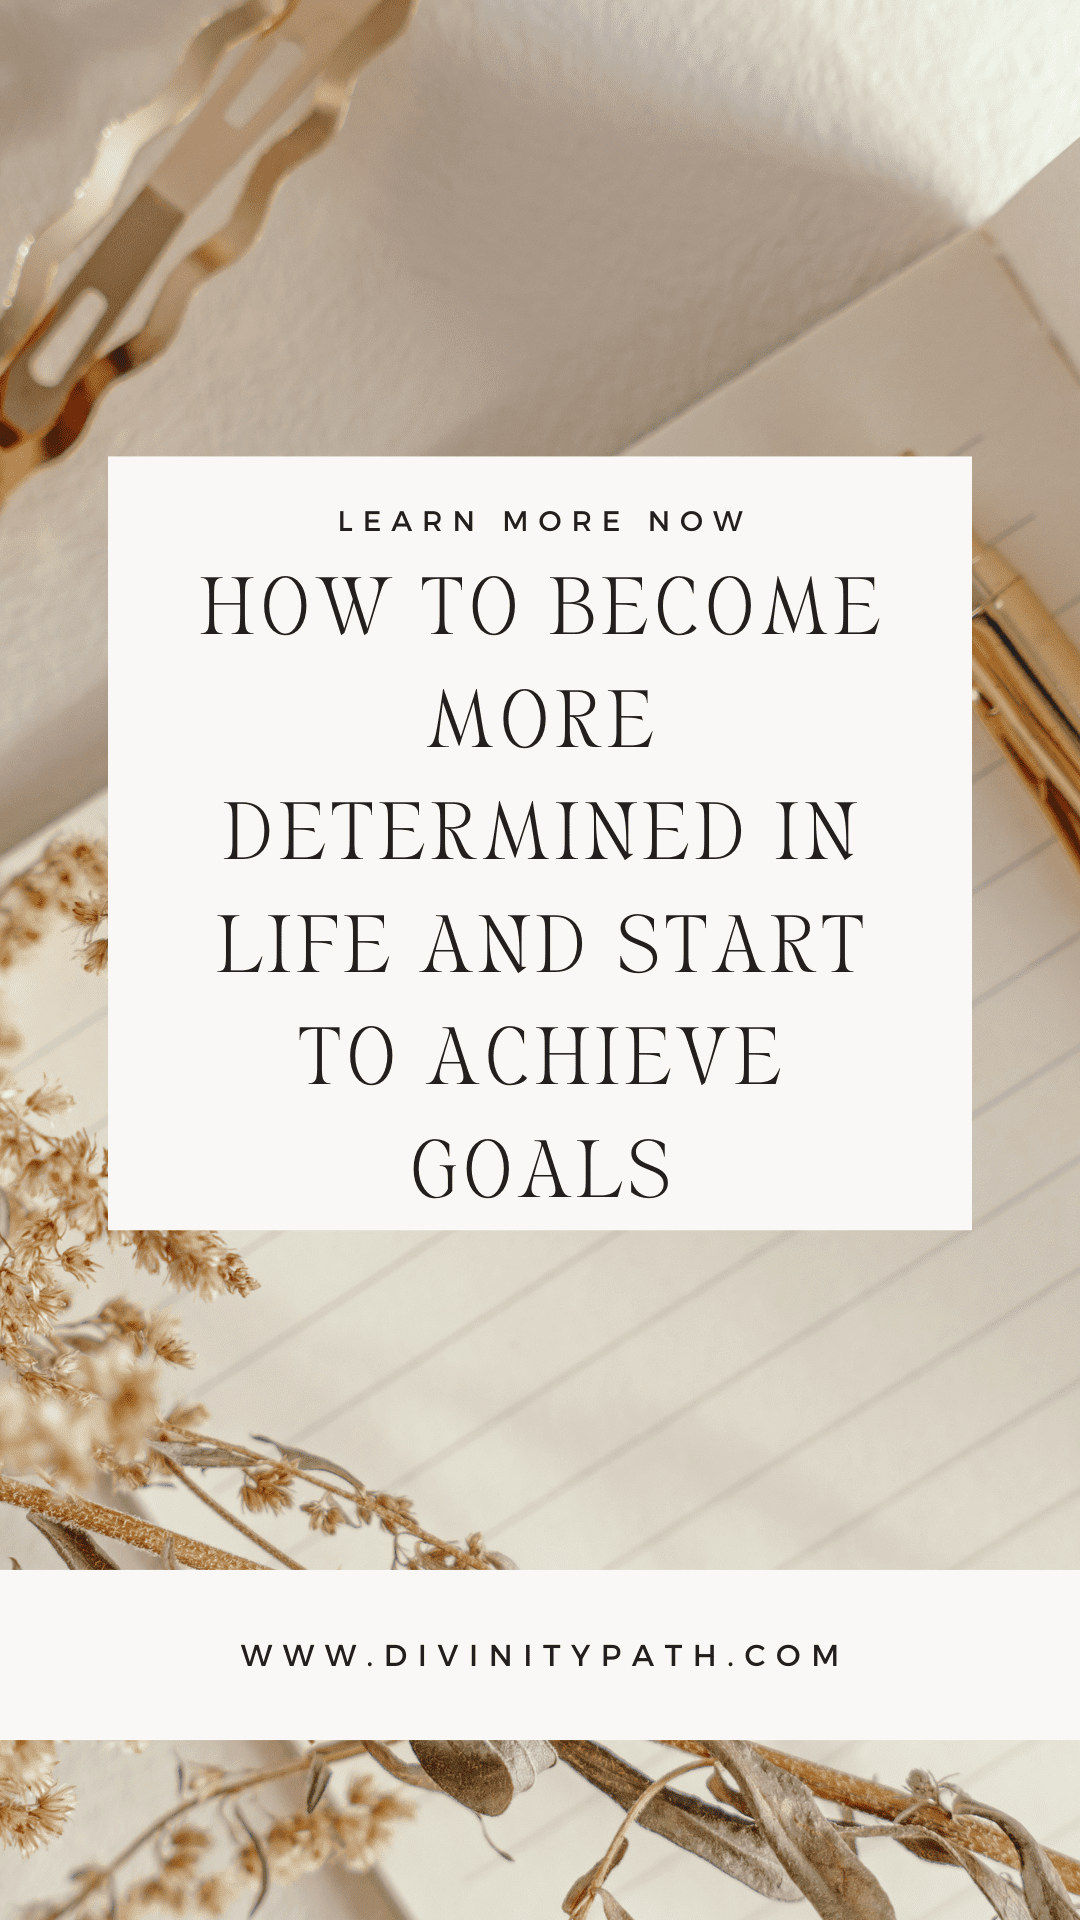 How To Become More Determined In Life And Start to Achieve Goals